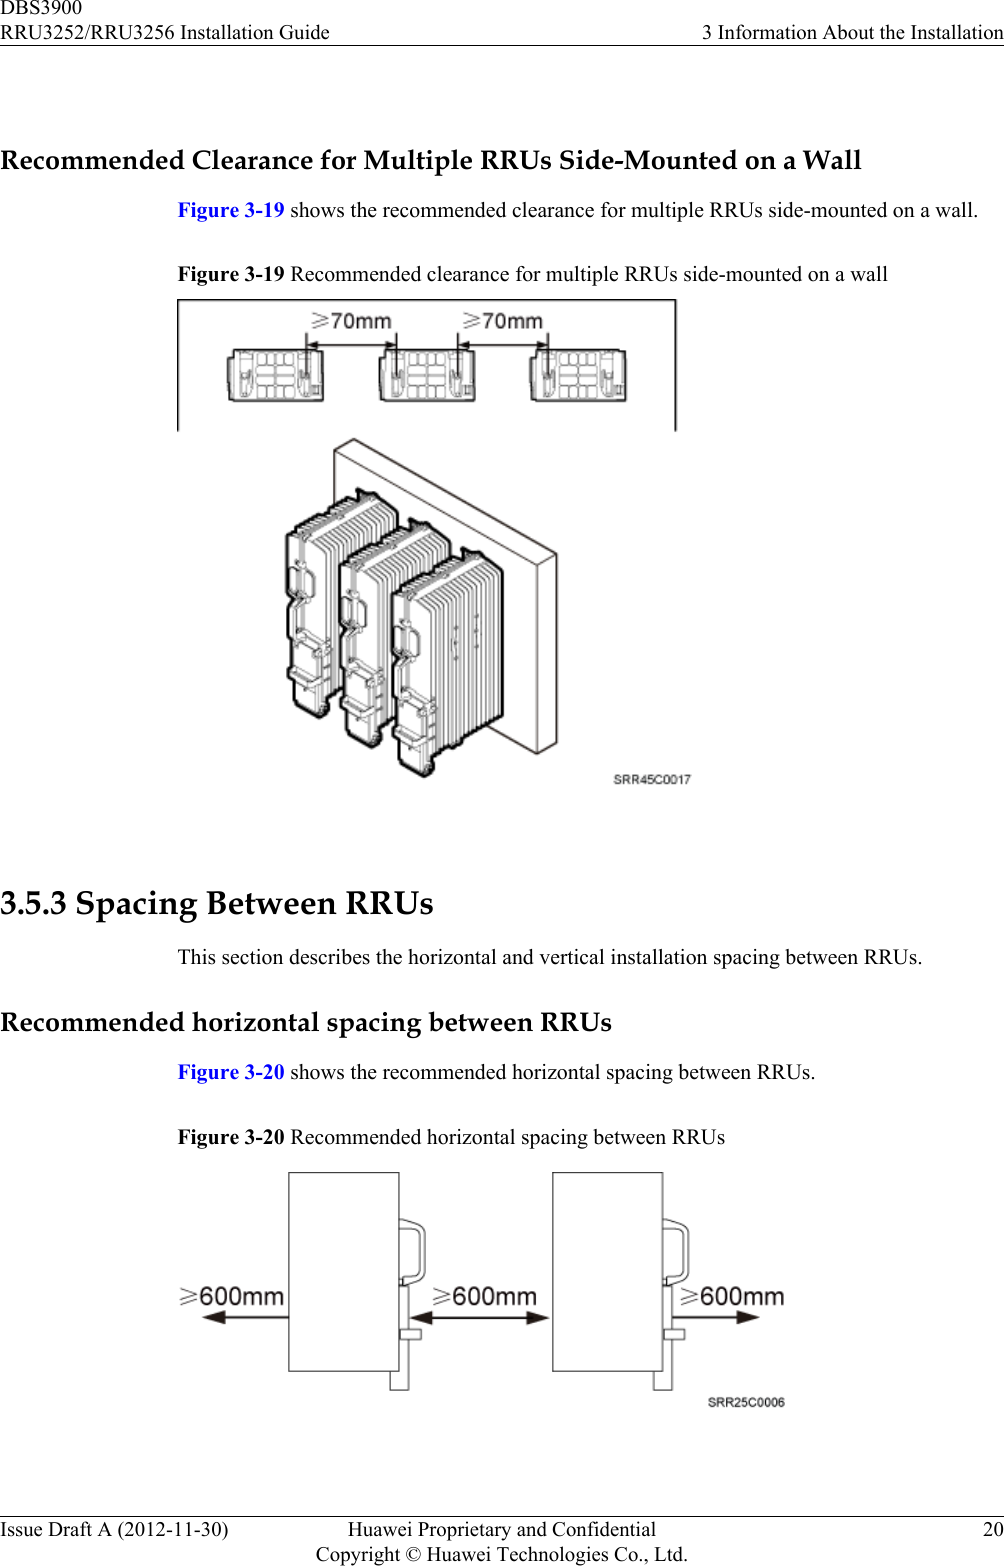  Recommended Clearance for Multiple RRUs Side-Mounted on a WallFigure 3-19 shows the recommended clearance for multiple RRUs side-mounted on a wall.Figure 3-19 Recommended clearance for multiple RRUs side-mounted on a wall 3.5.3 Spacing Between RRUsThis section describes the horizontal and vertical installation spacing between RRUs.Recommended horizontal spacing between RRUsFigure 3-20 shows the recommended horizontal spacing between RRUs.Figure 3-20 Recommended horizontal spacing between RRUs DBS3900RRU3252/RRU3256 Installation Guide 3 Information About the InstallationIssue Draft A (2012-11-30) Huawei Proprietary and ConfidentialCopyright © Huawei Technologies Co., Ltd.20